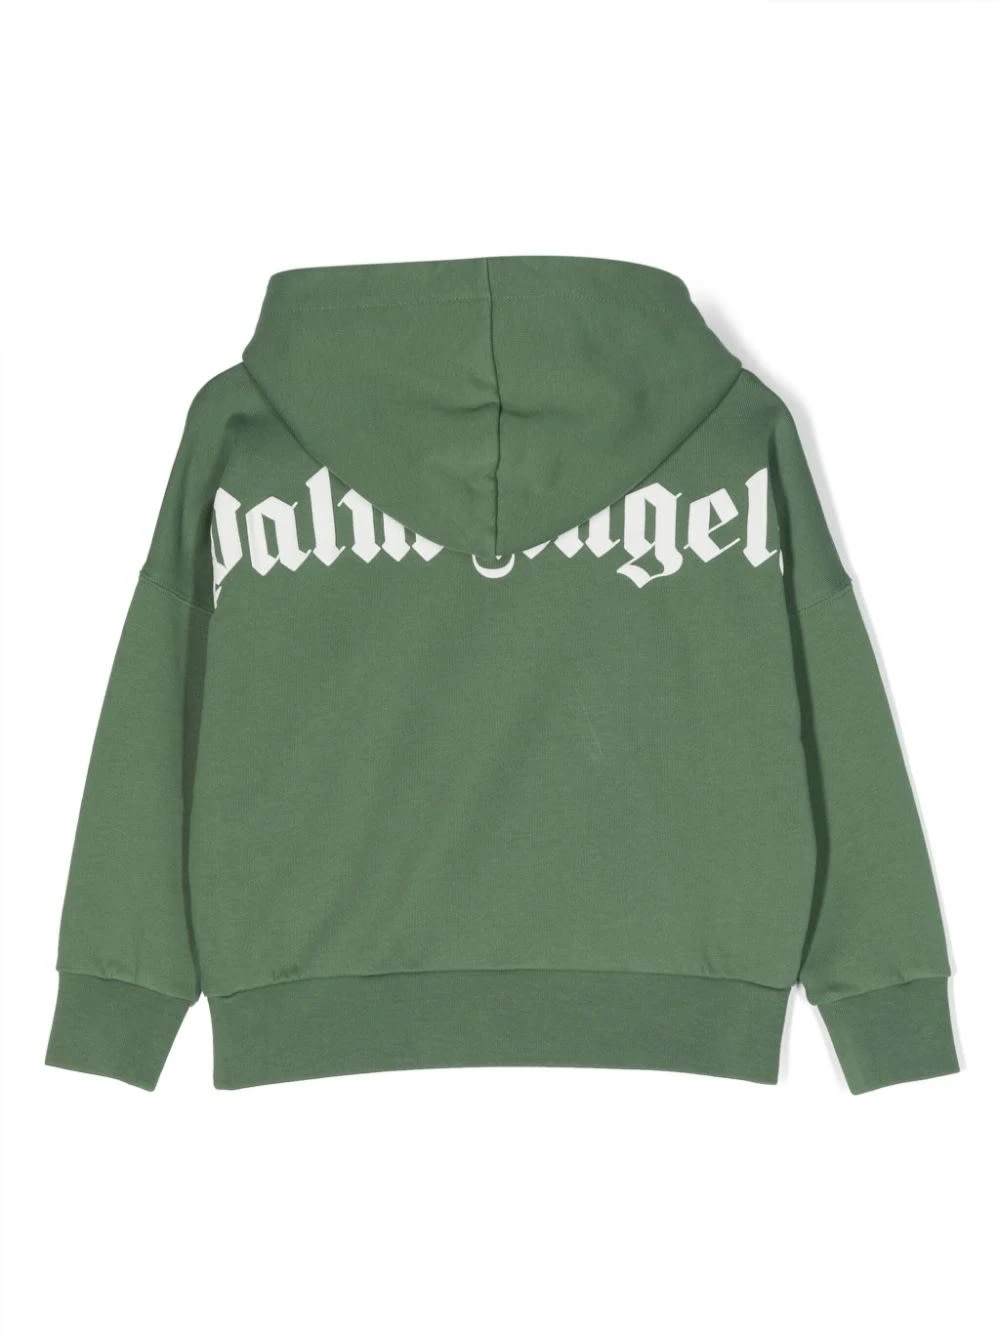 Shop Palm Angels Green Hoodie With Logo